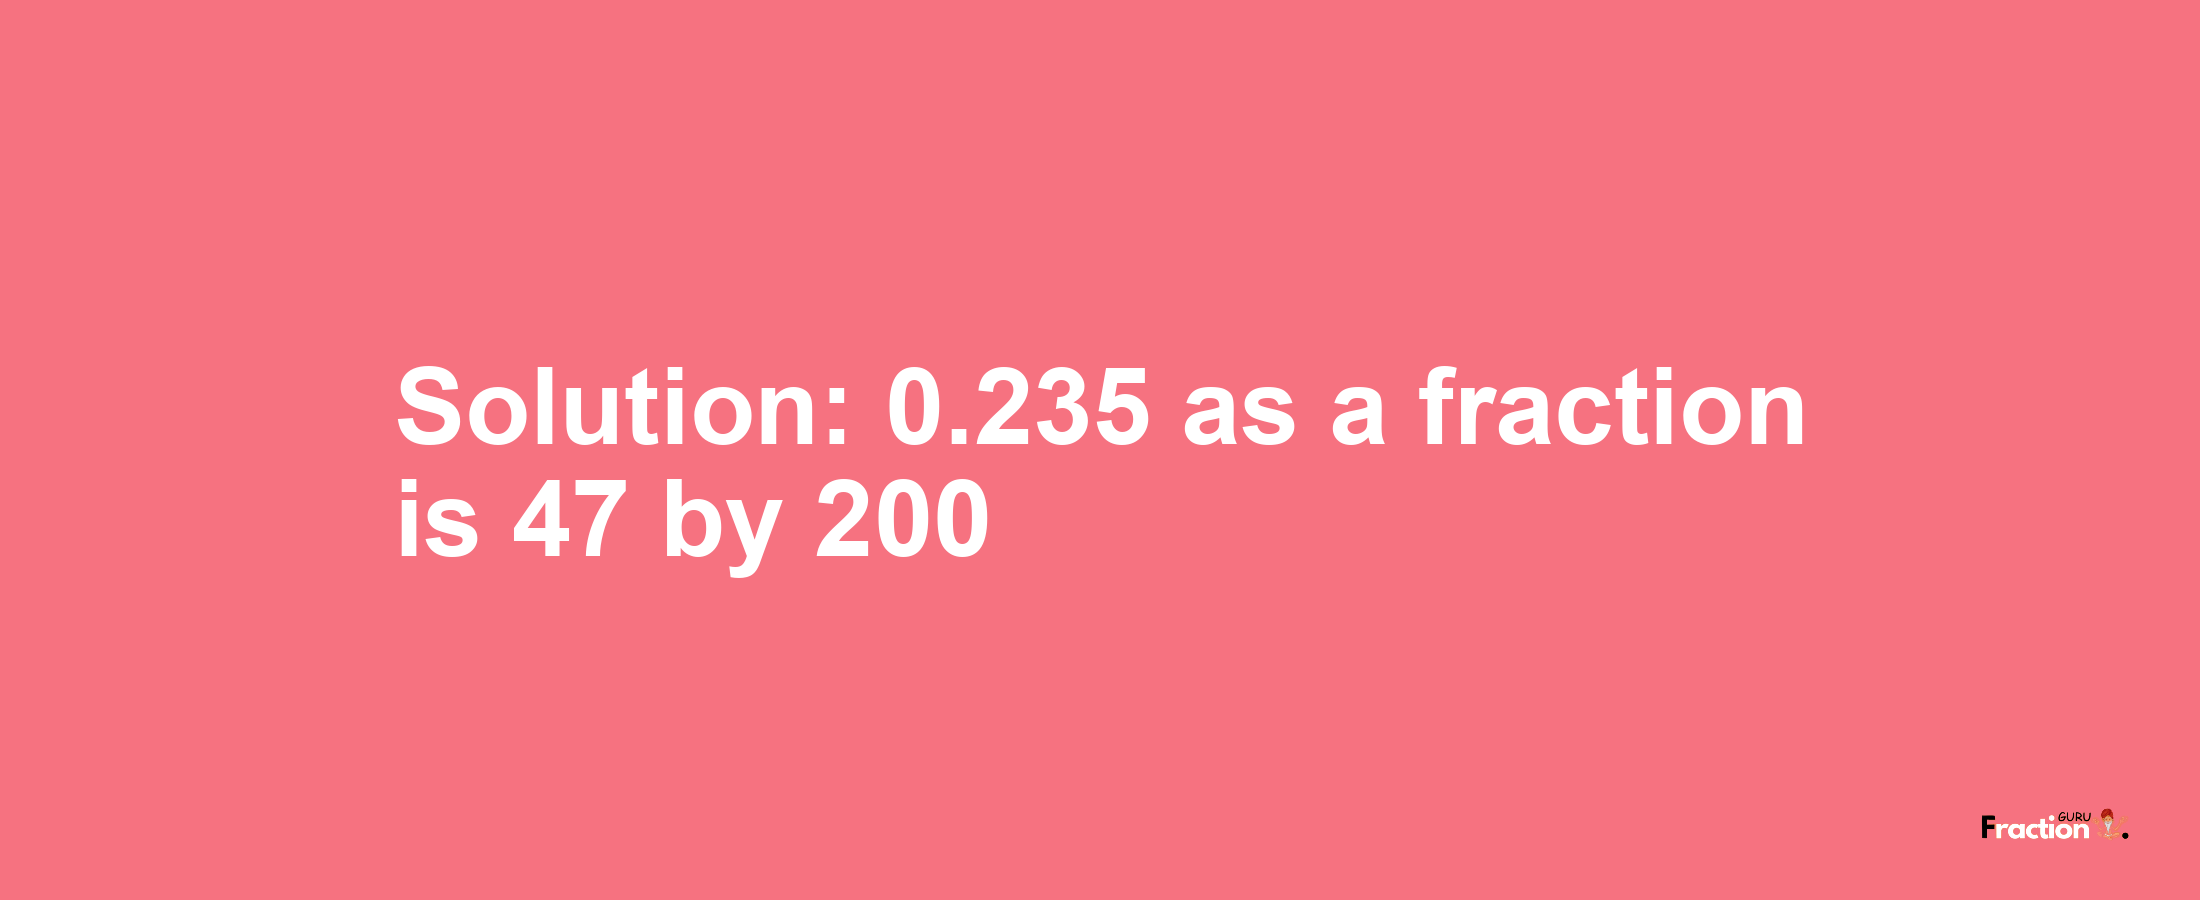 Solution:0.235 as a fraction is 47/200